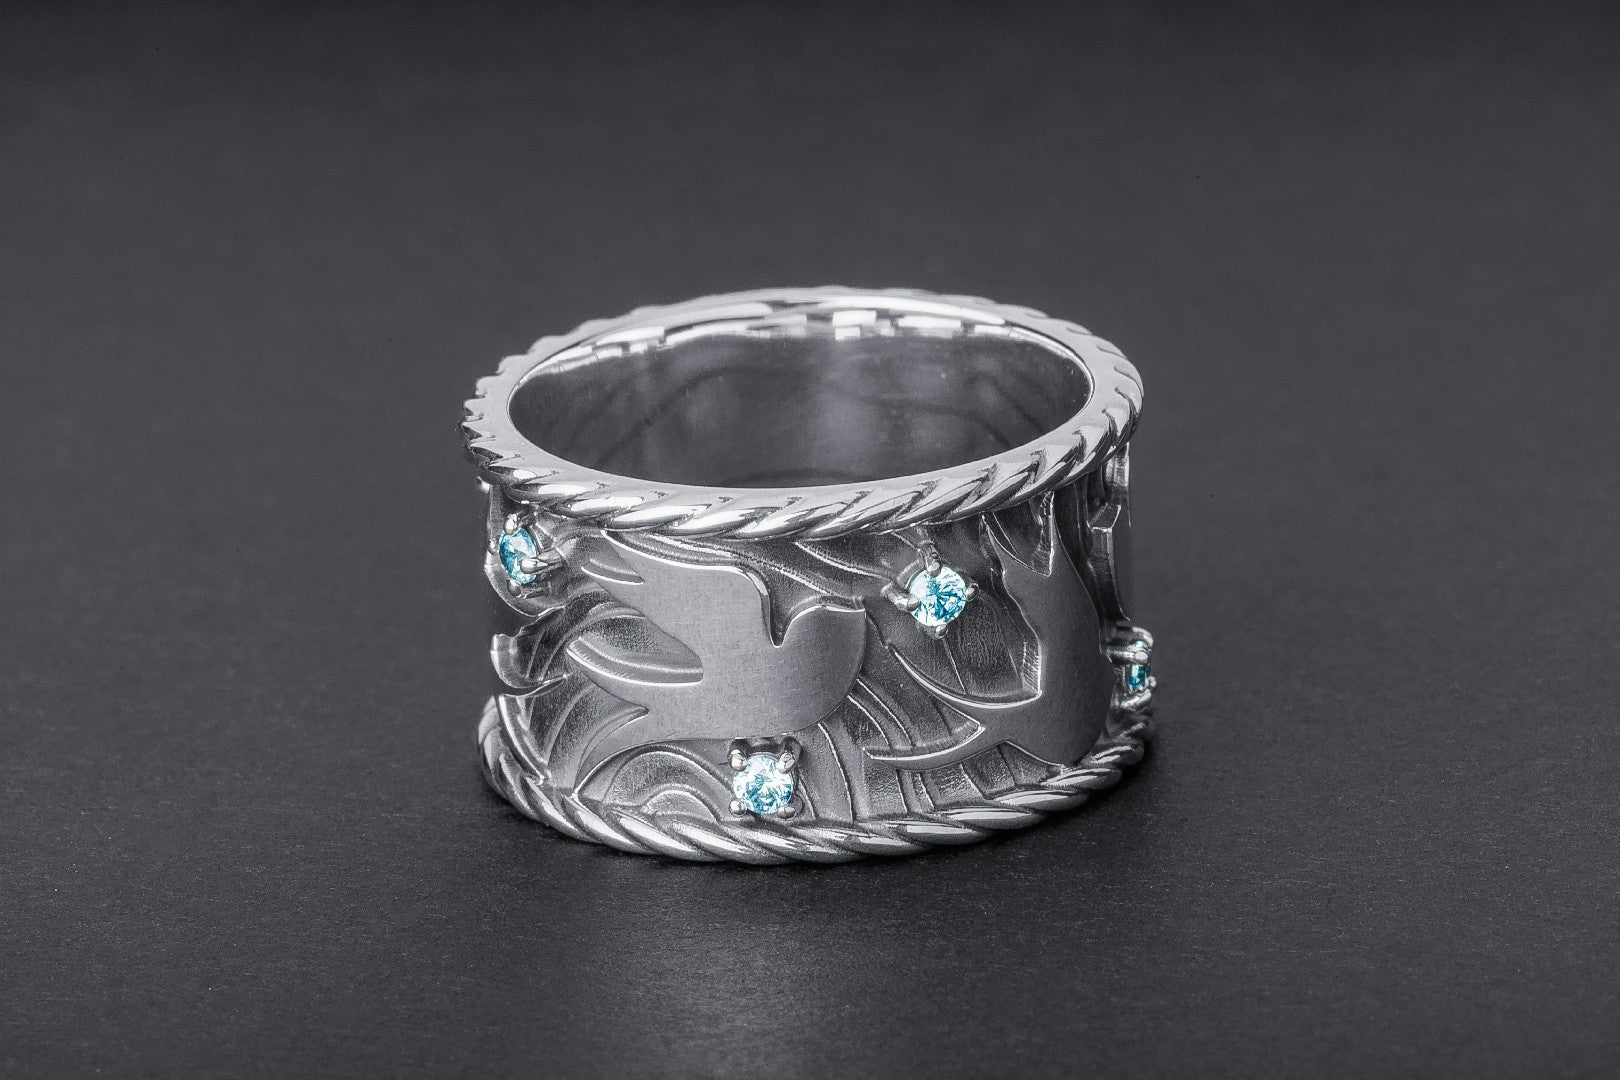 Marlet Birds Ring with Gems, 925 Silver